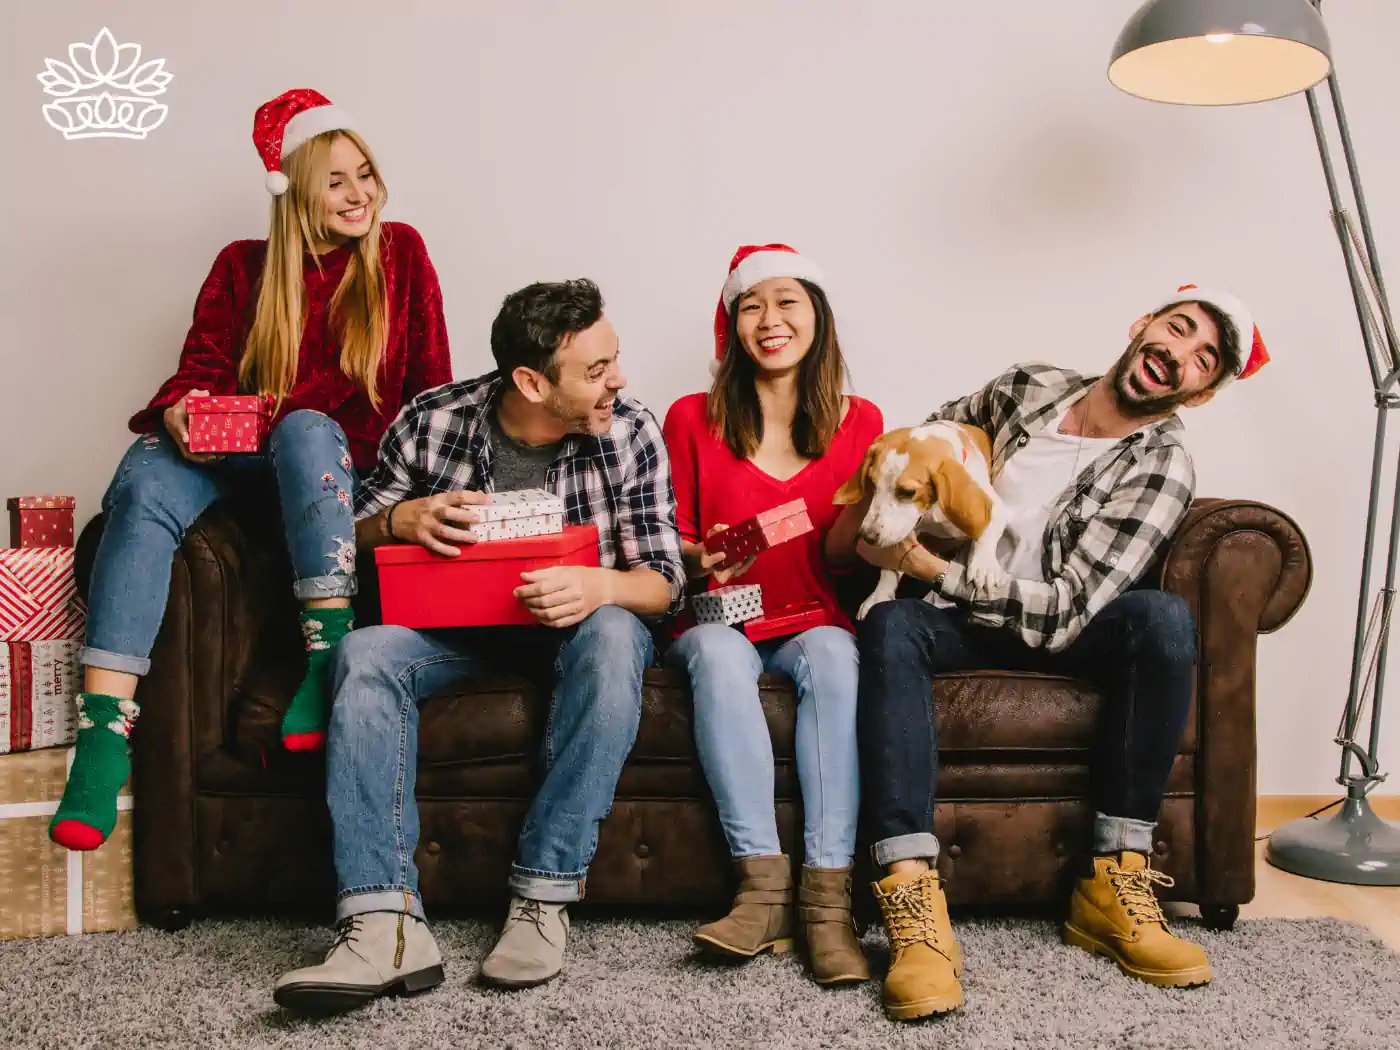 A group of friends sitting on a couch, joyfully holding gift boxes and a beagle dog, with more presents stacked nearby, part of the Festive Season Gift Boxes Collection. Delivered with Heart by Fabulous Flowers and Gifts.